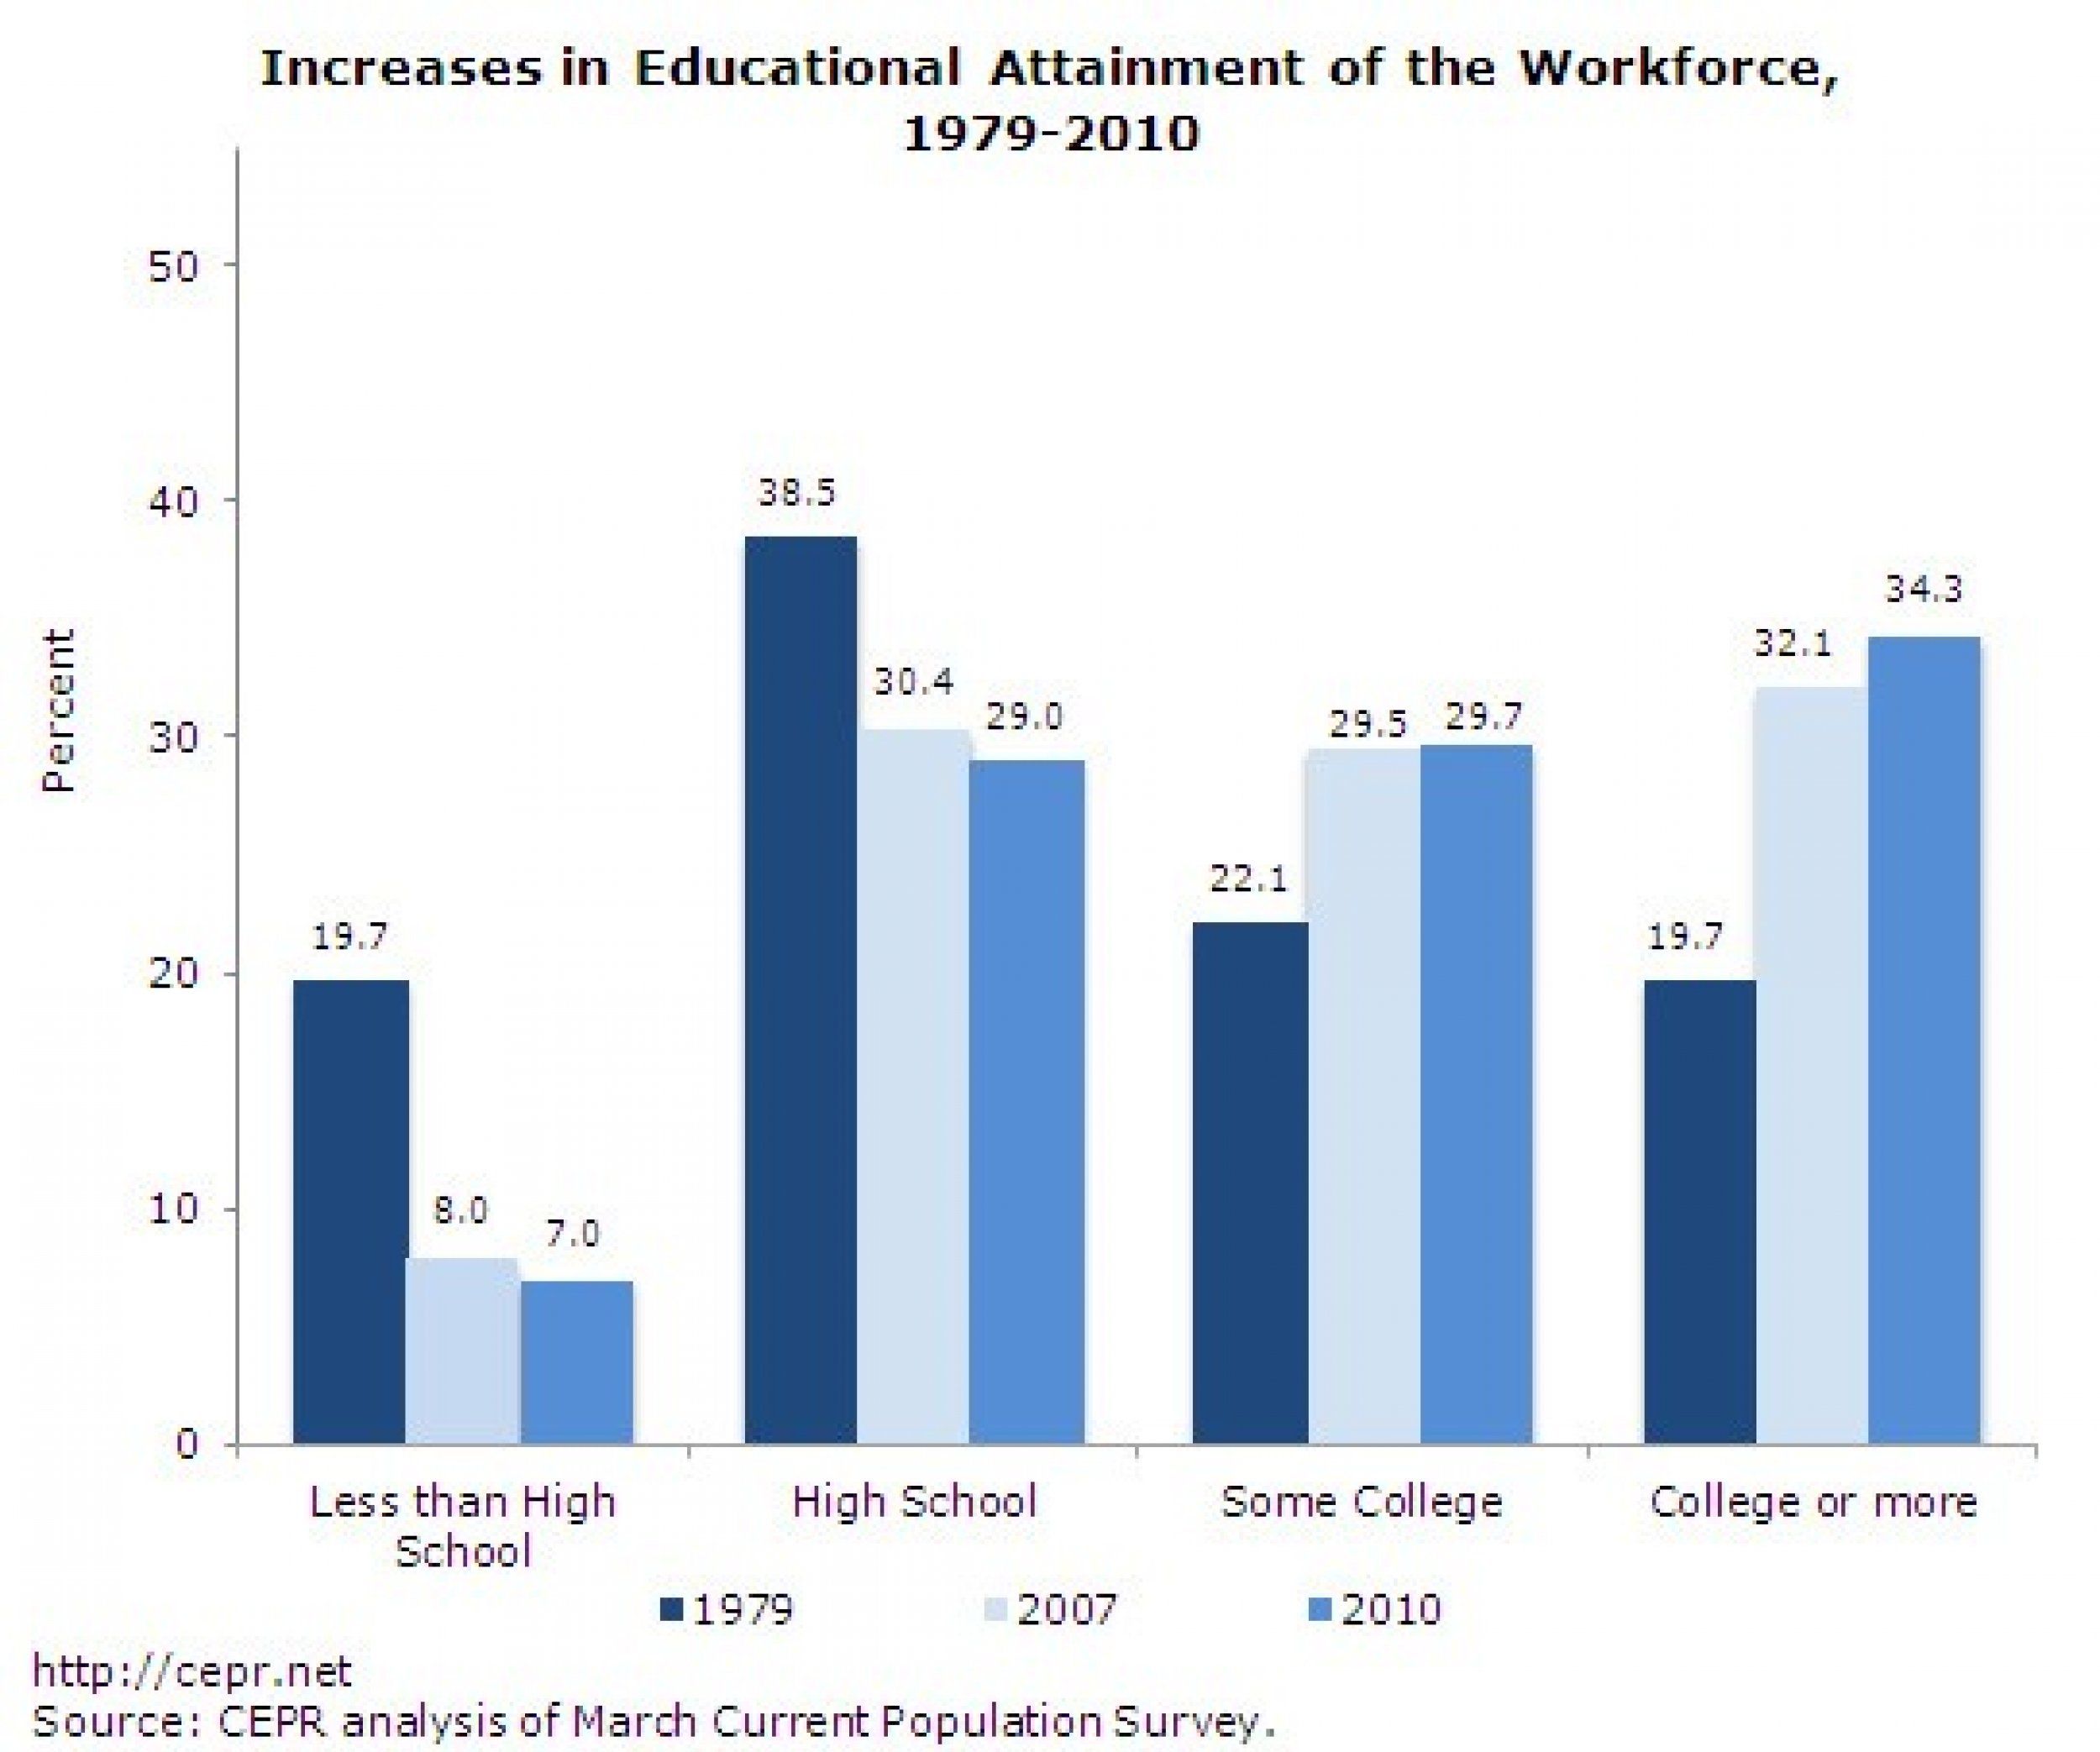 Increases in Educational Attainment of the Workforce, 1979-2010